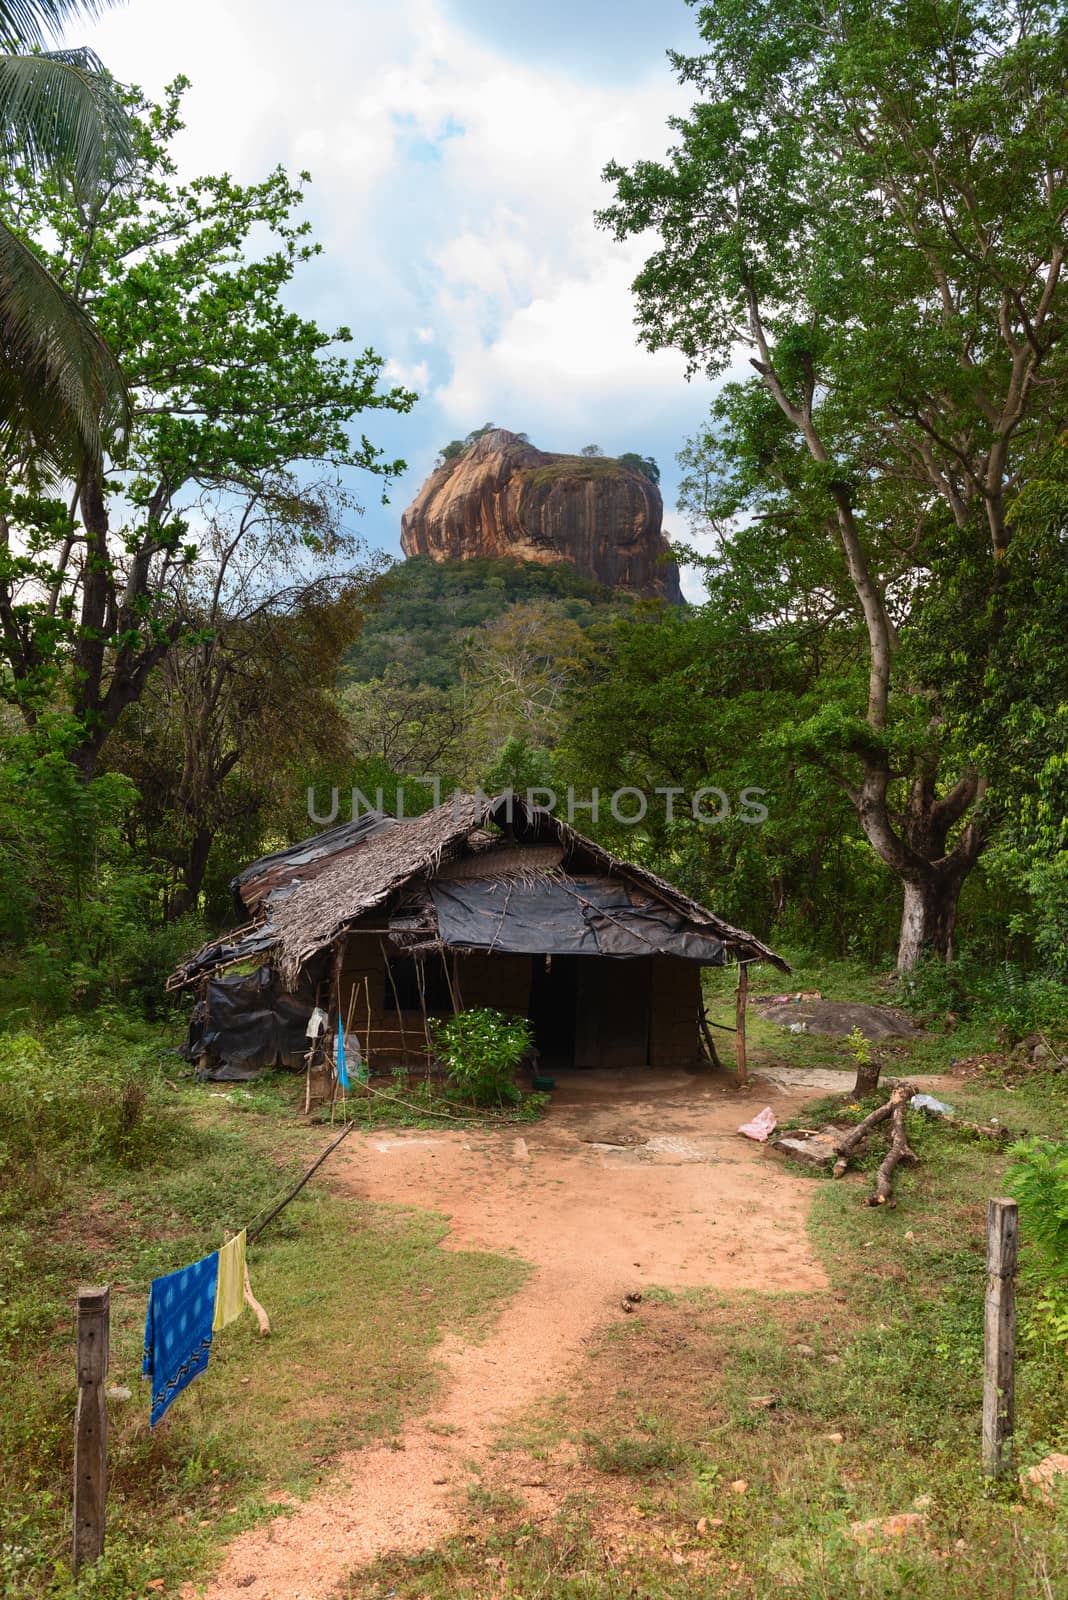 Shack in front of high rock under green forest. Sigiriya, Lion's rock with ancient rock fortress castle. Sri Lanka 